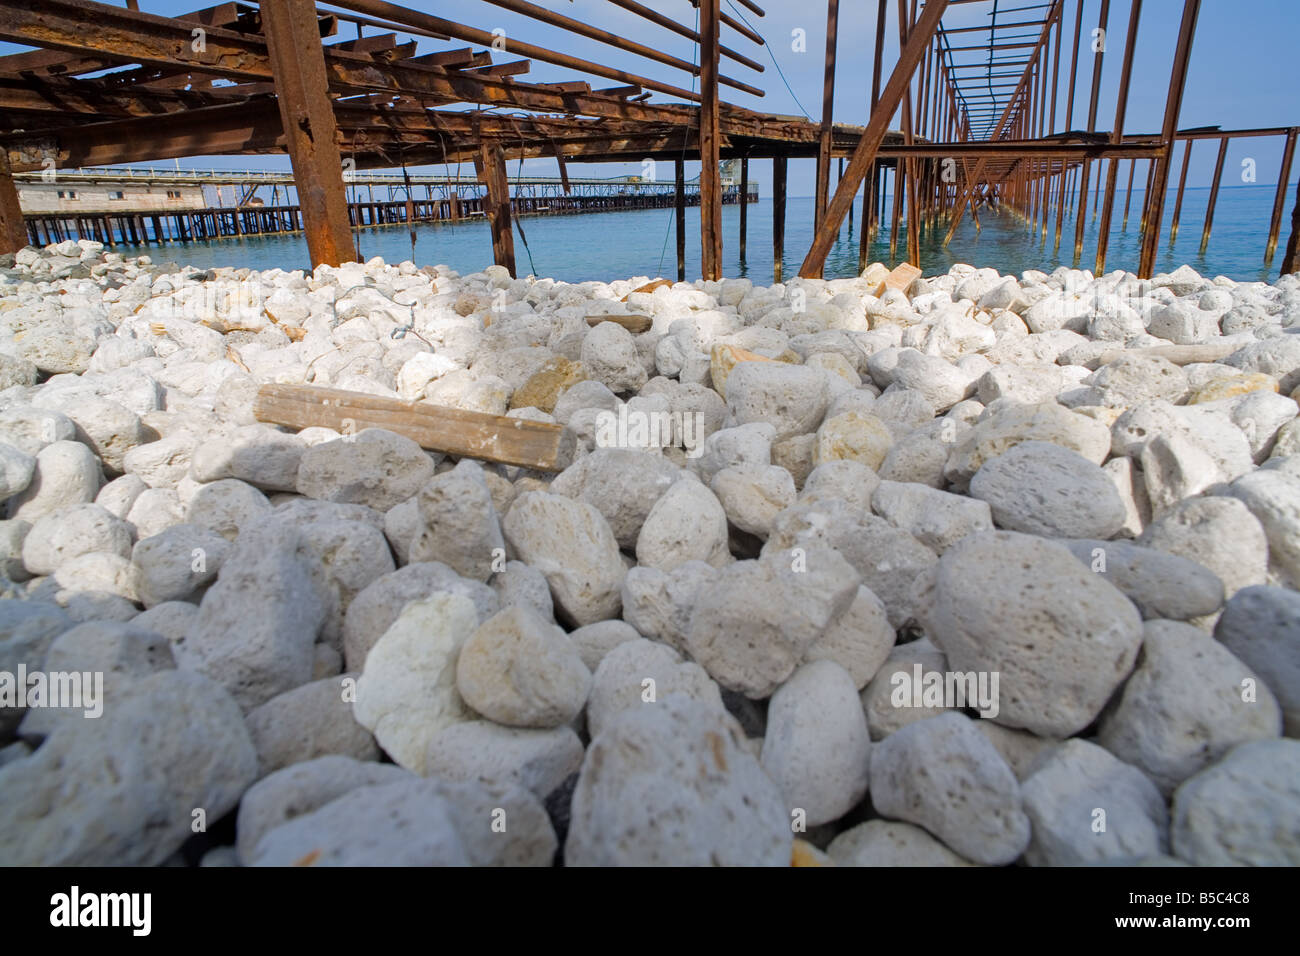 White pumice stones and rusted piers at the pumice quarries at Lipari Island Stock Photo